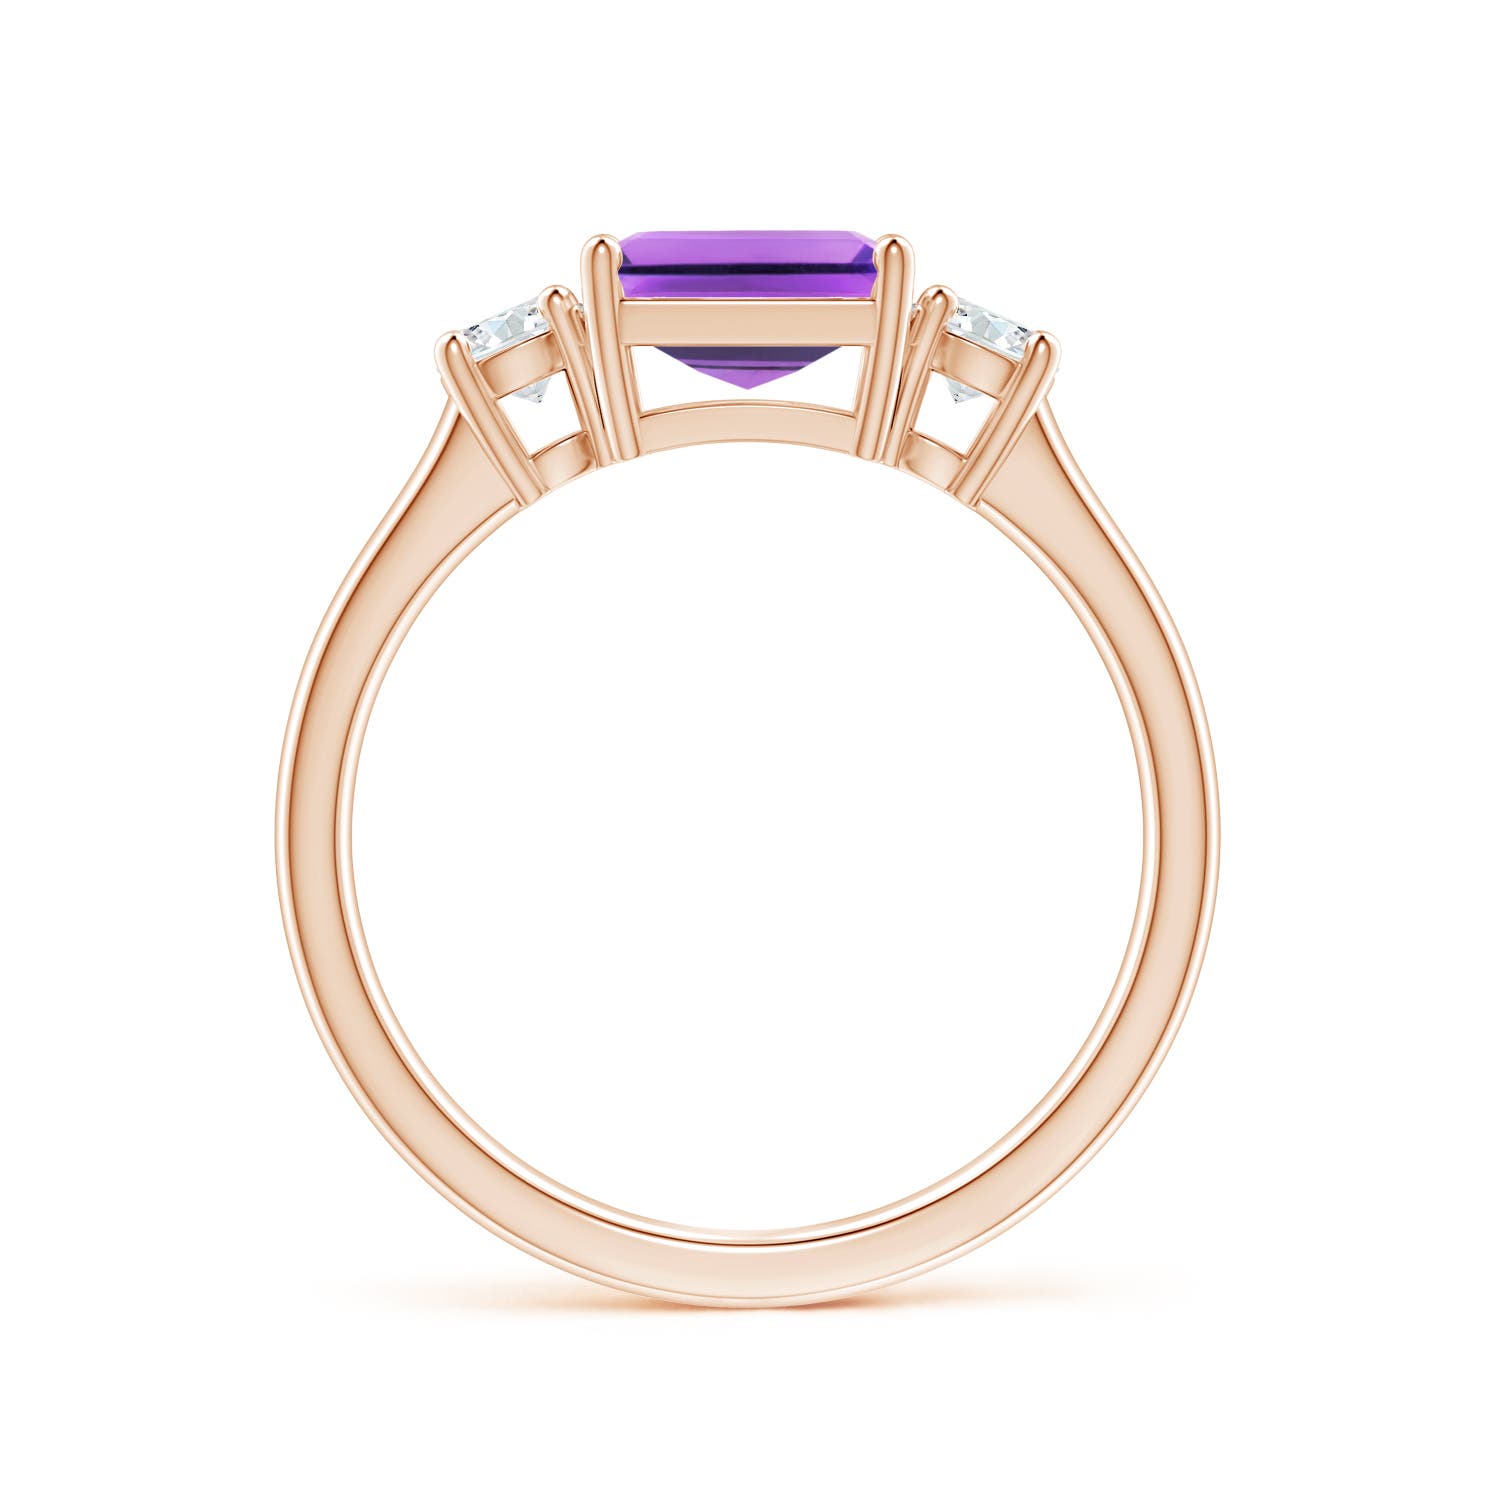 AA - Amethyst / 1.62 CT / 14 KT Rose Gold